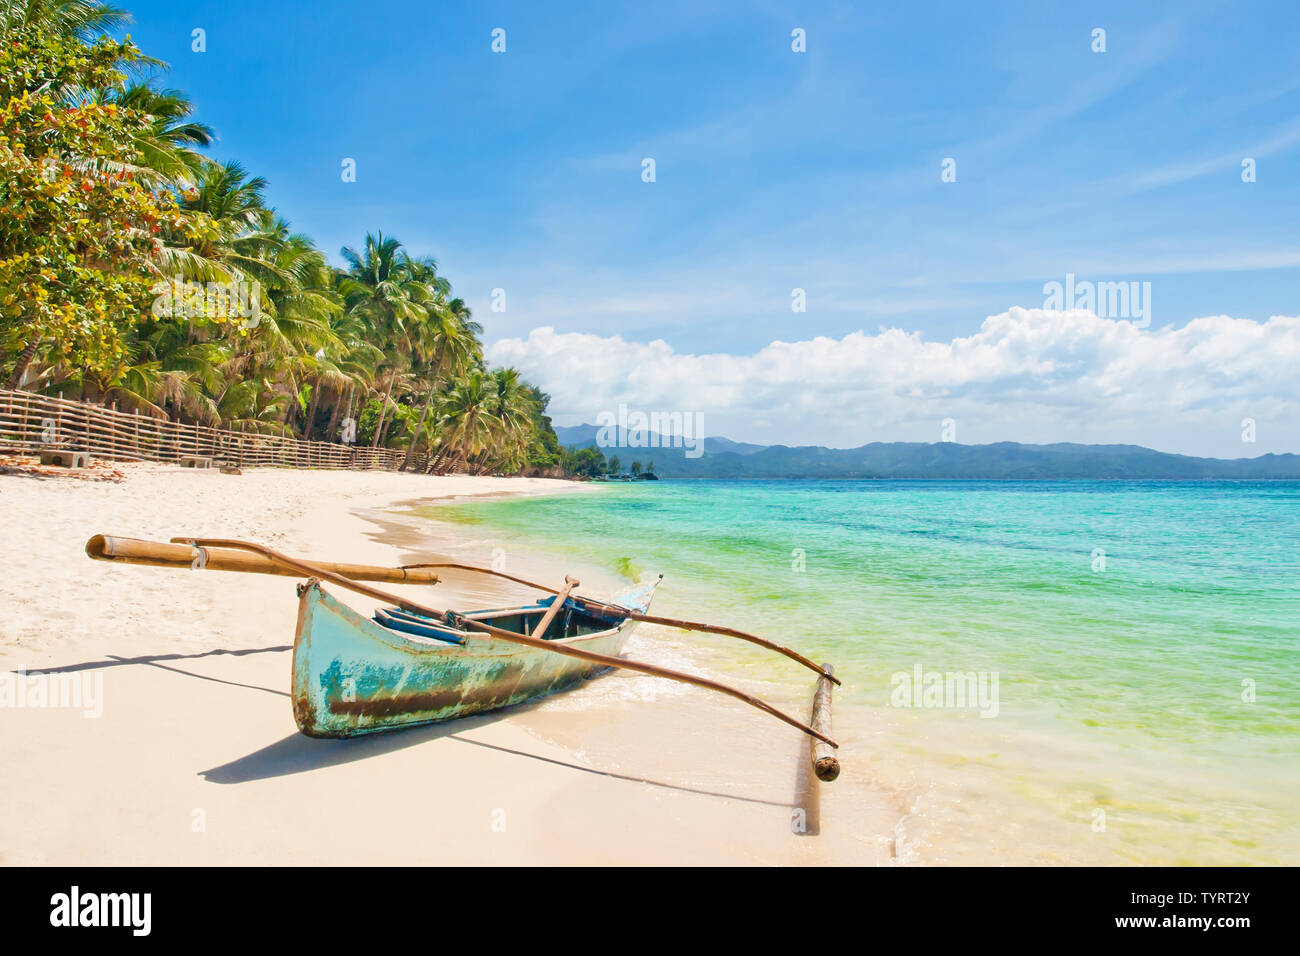 old traditional outrigger fishing boat on white sand beach with palm trees on sunny summer day, Boracay island, the Philippines Stock Photo